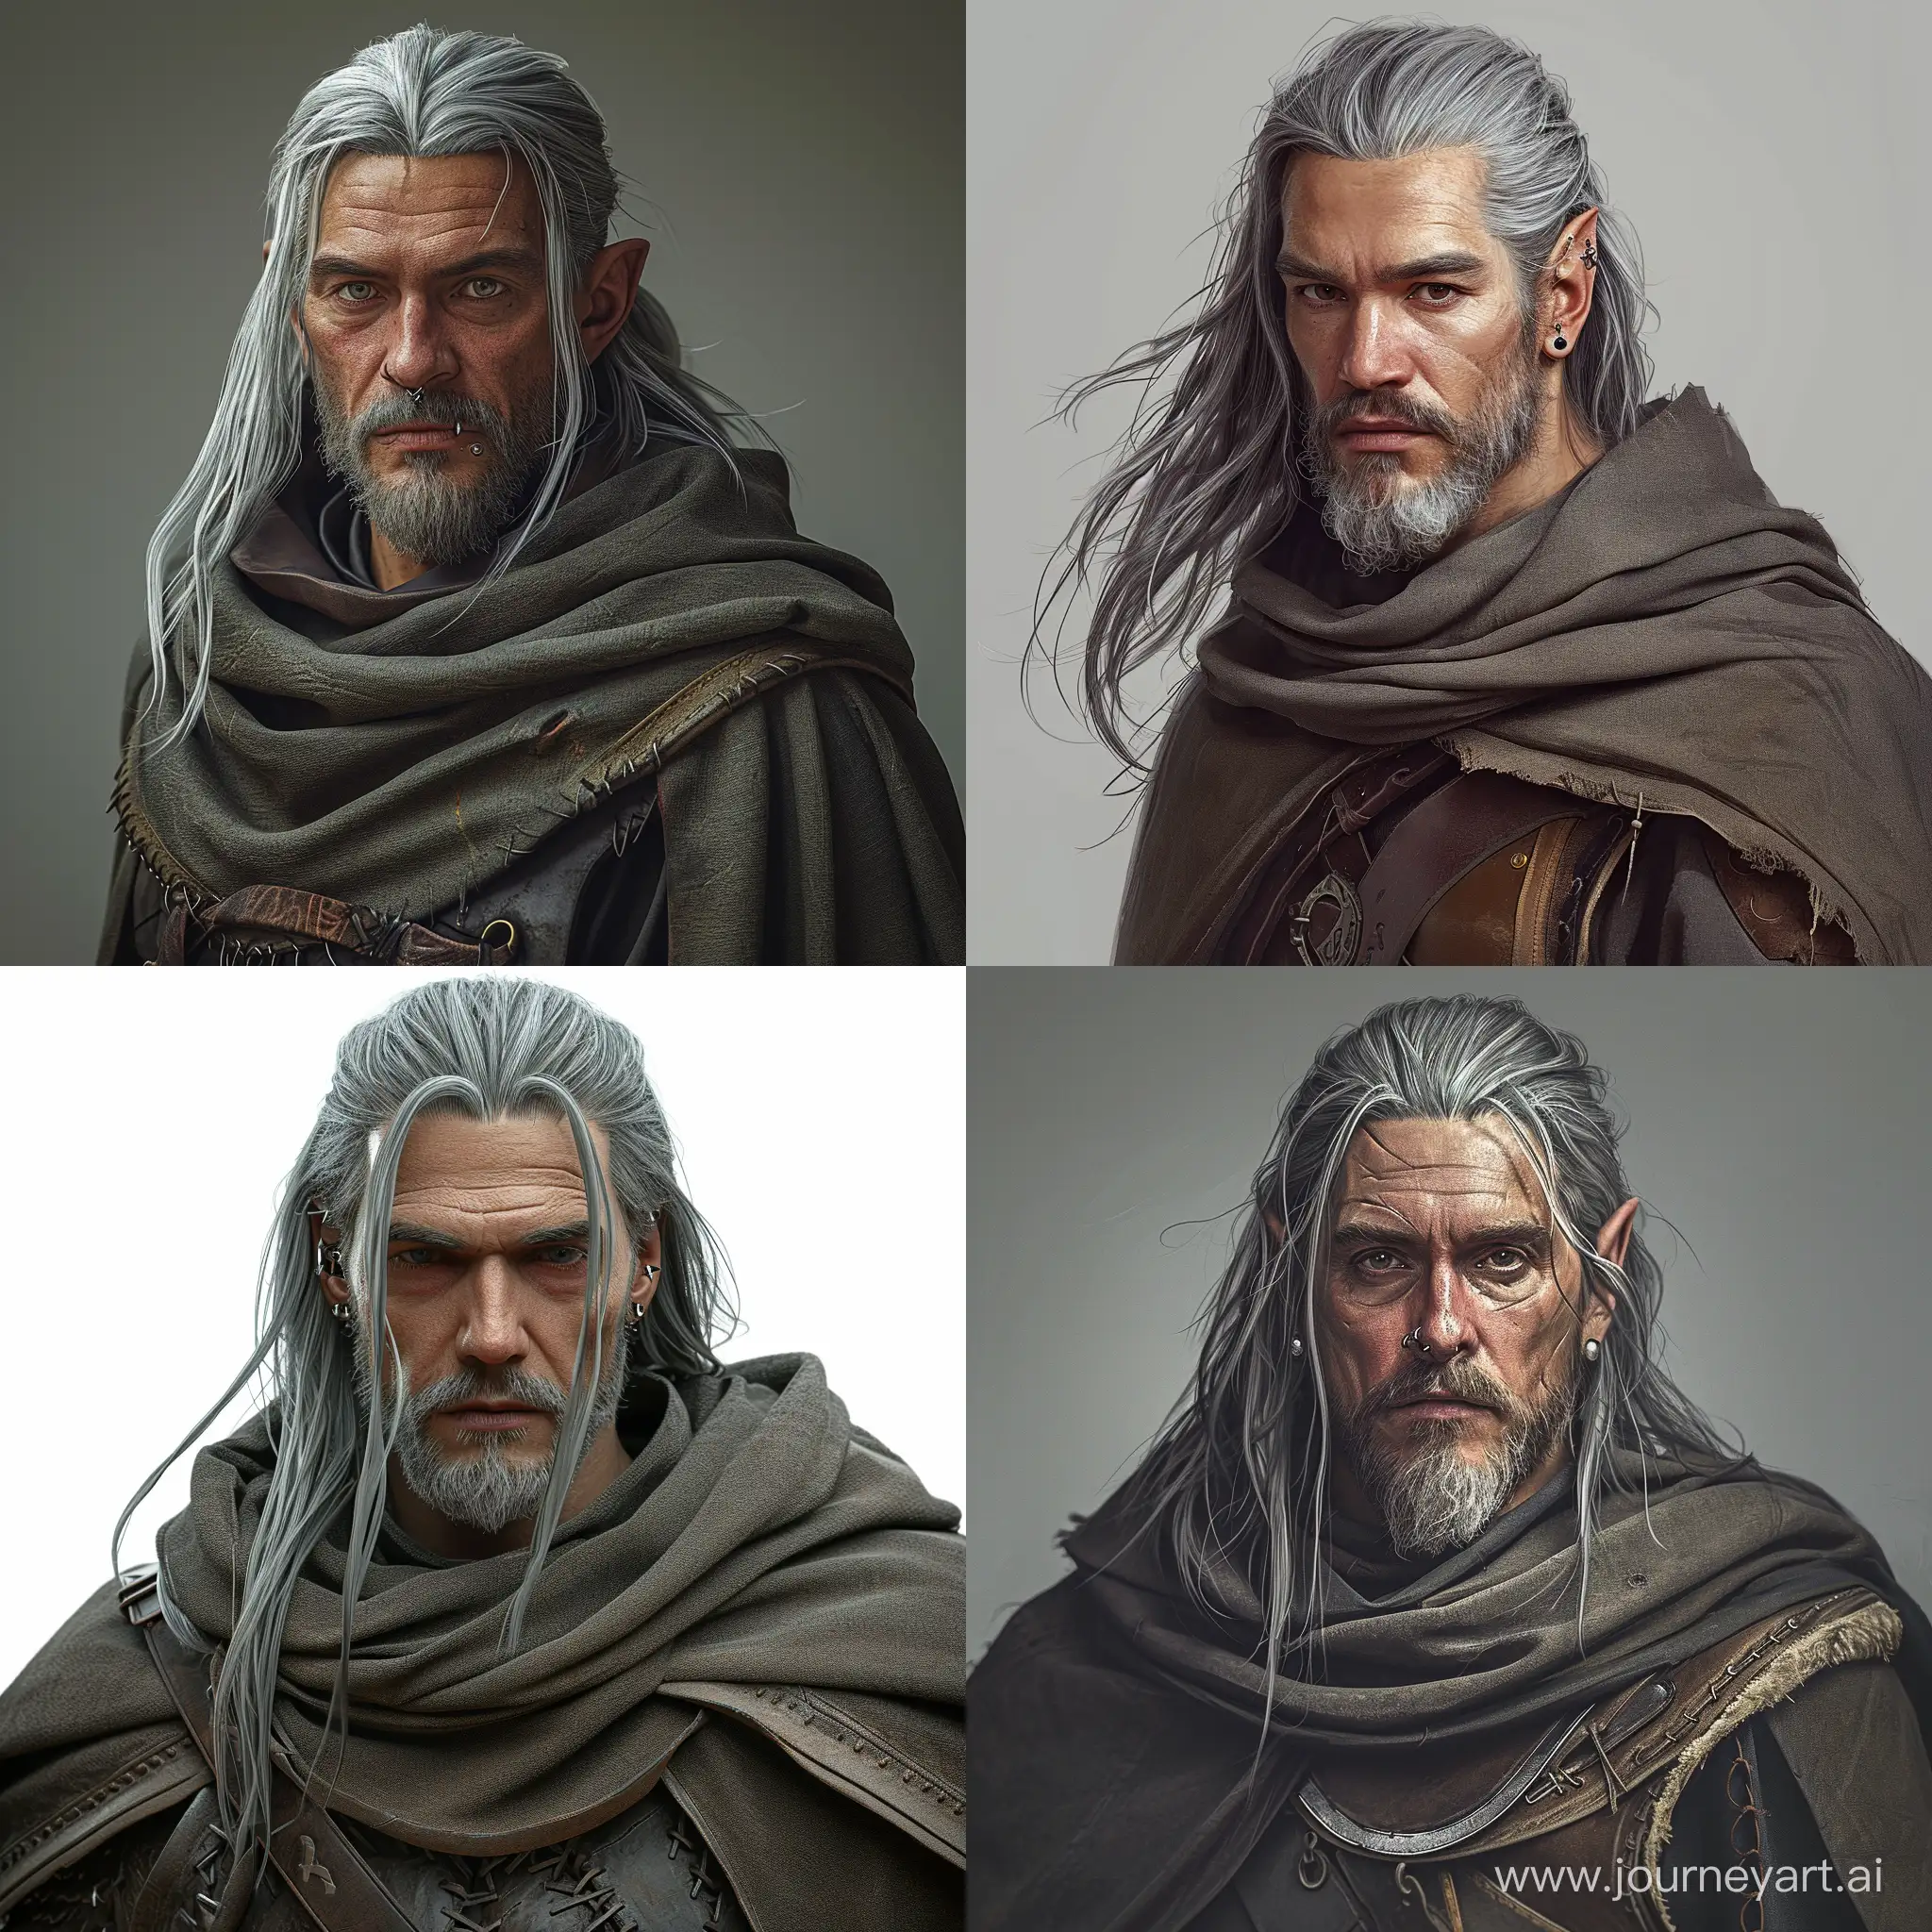 Generate a realistic image of beardless ice mage with long gray hair swept back. He is about 30 years old, wearing a cloak and leather armor. His face is round, with piercings in his lips and ears